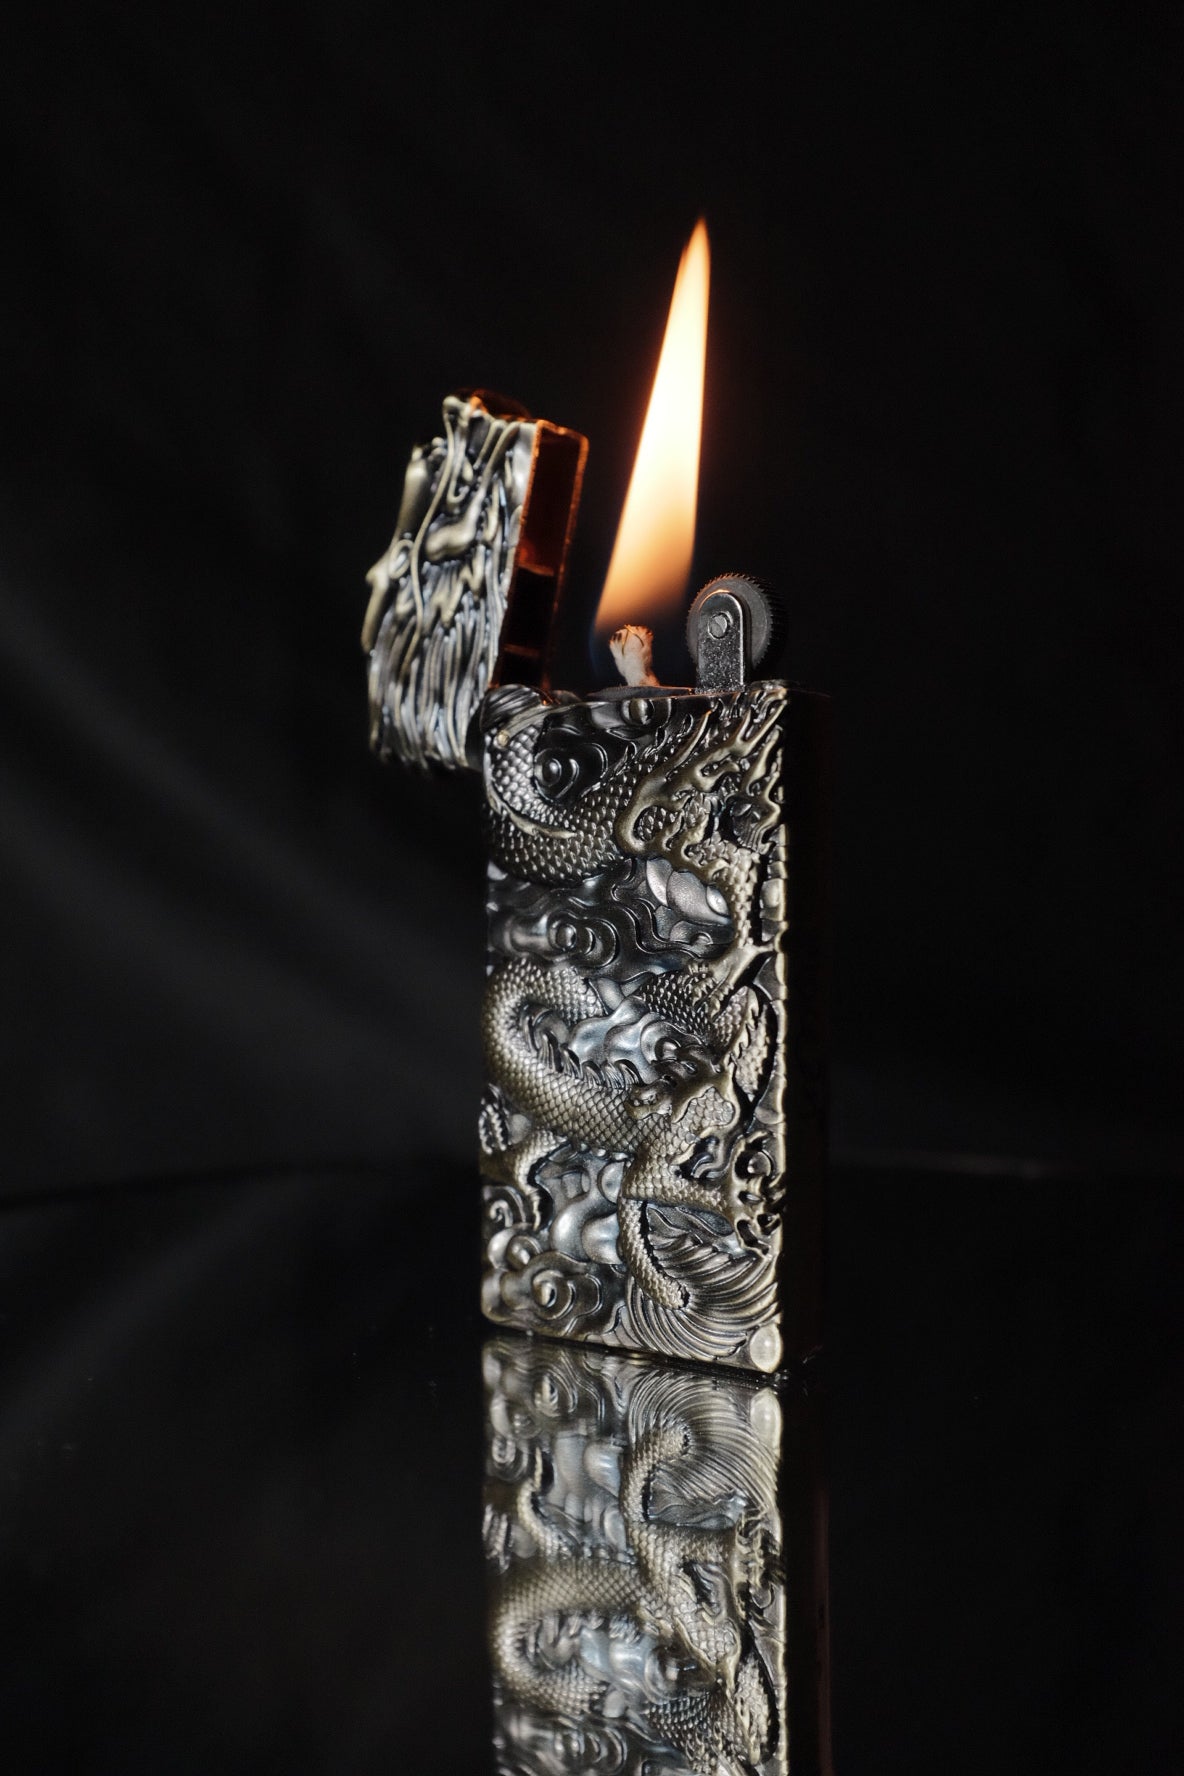 Mocean Year Of The Dragon Lighter